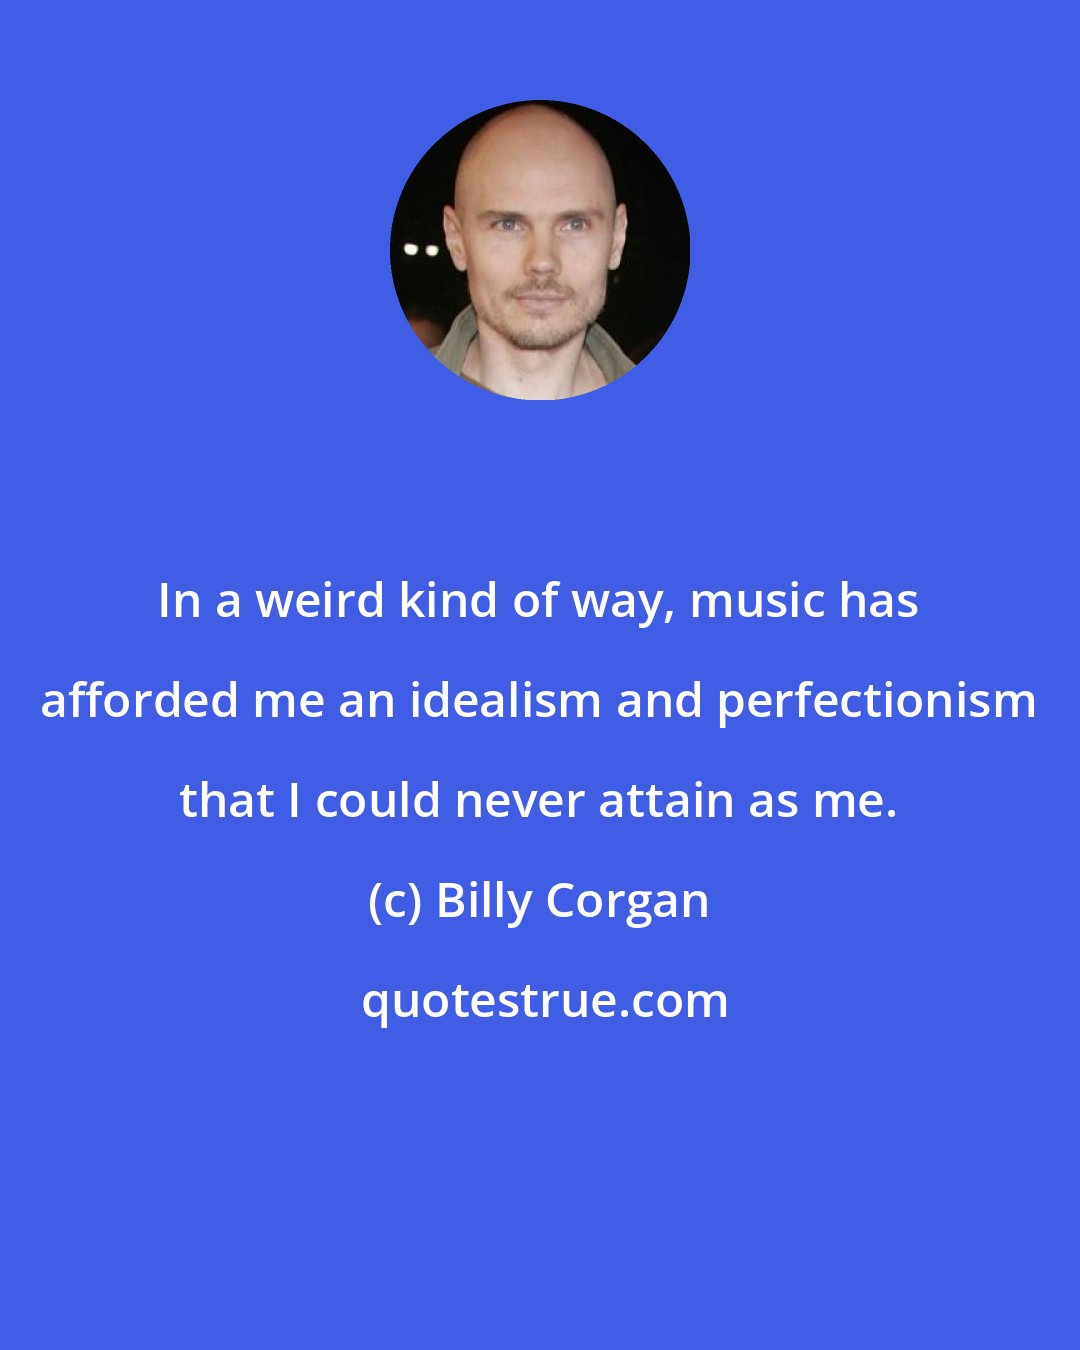 Billy Corgan: In a weird kind of way, music has afforded me an idealism and perfectionism that I could never attain as me.